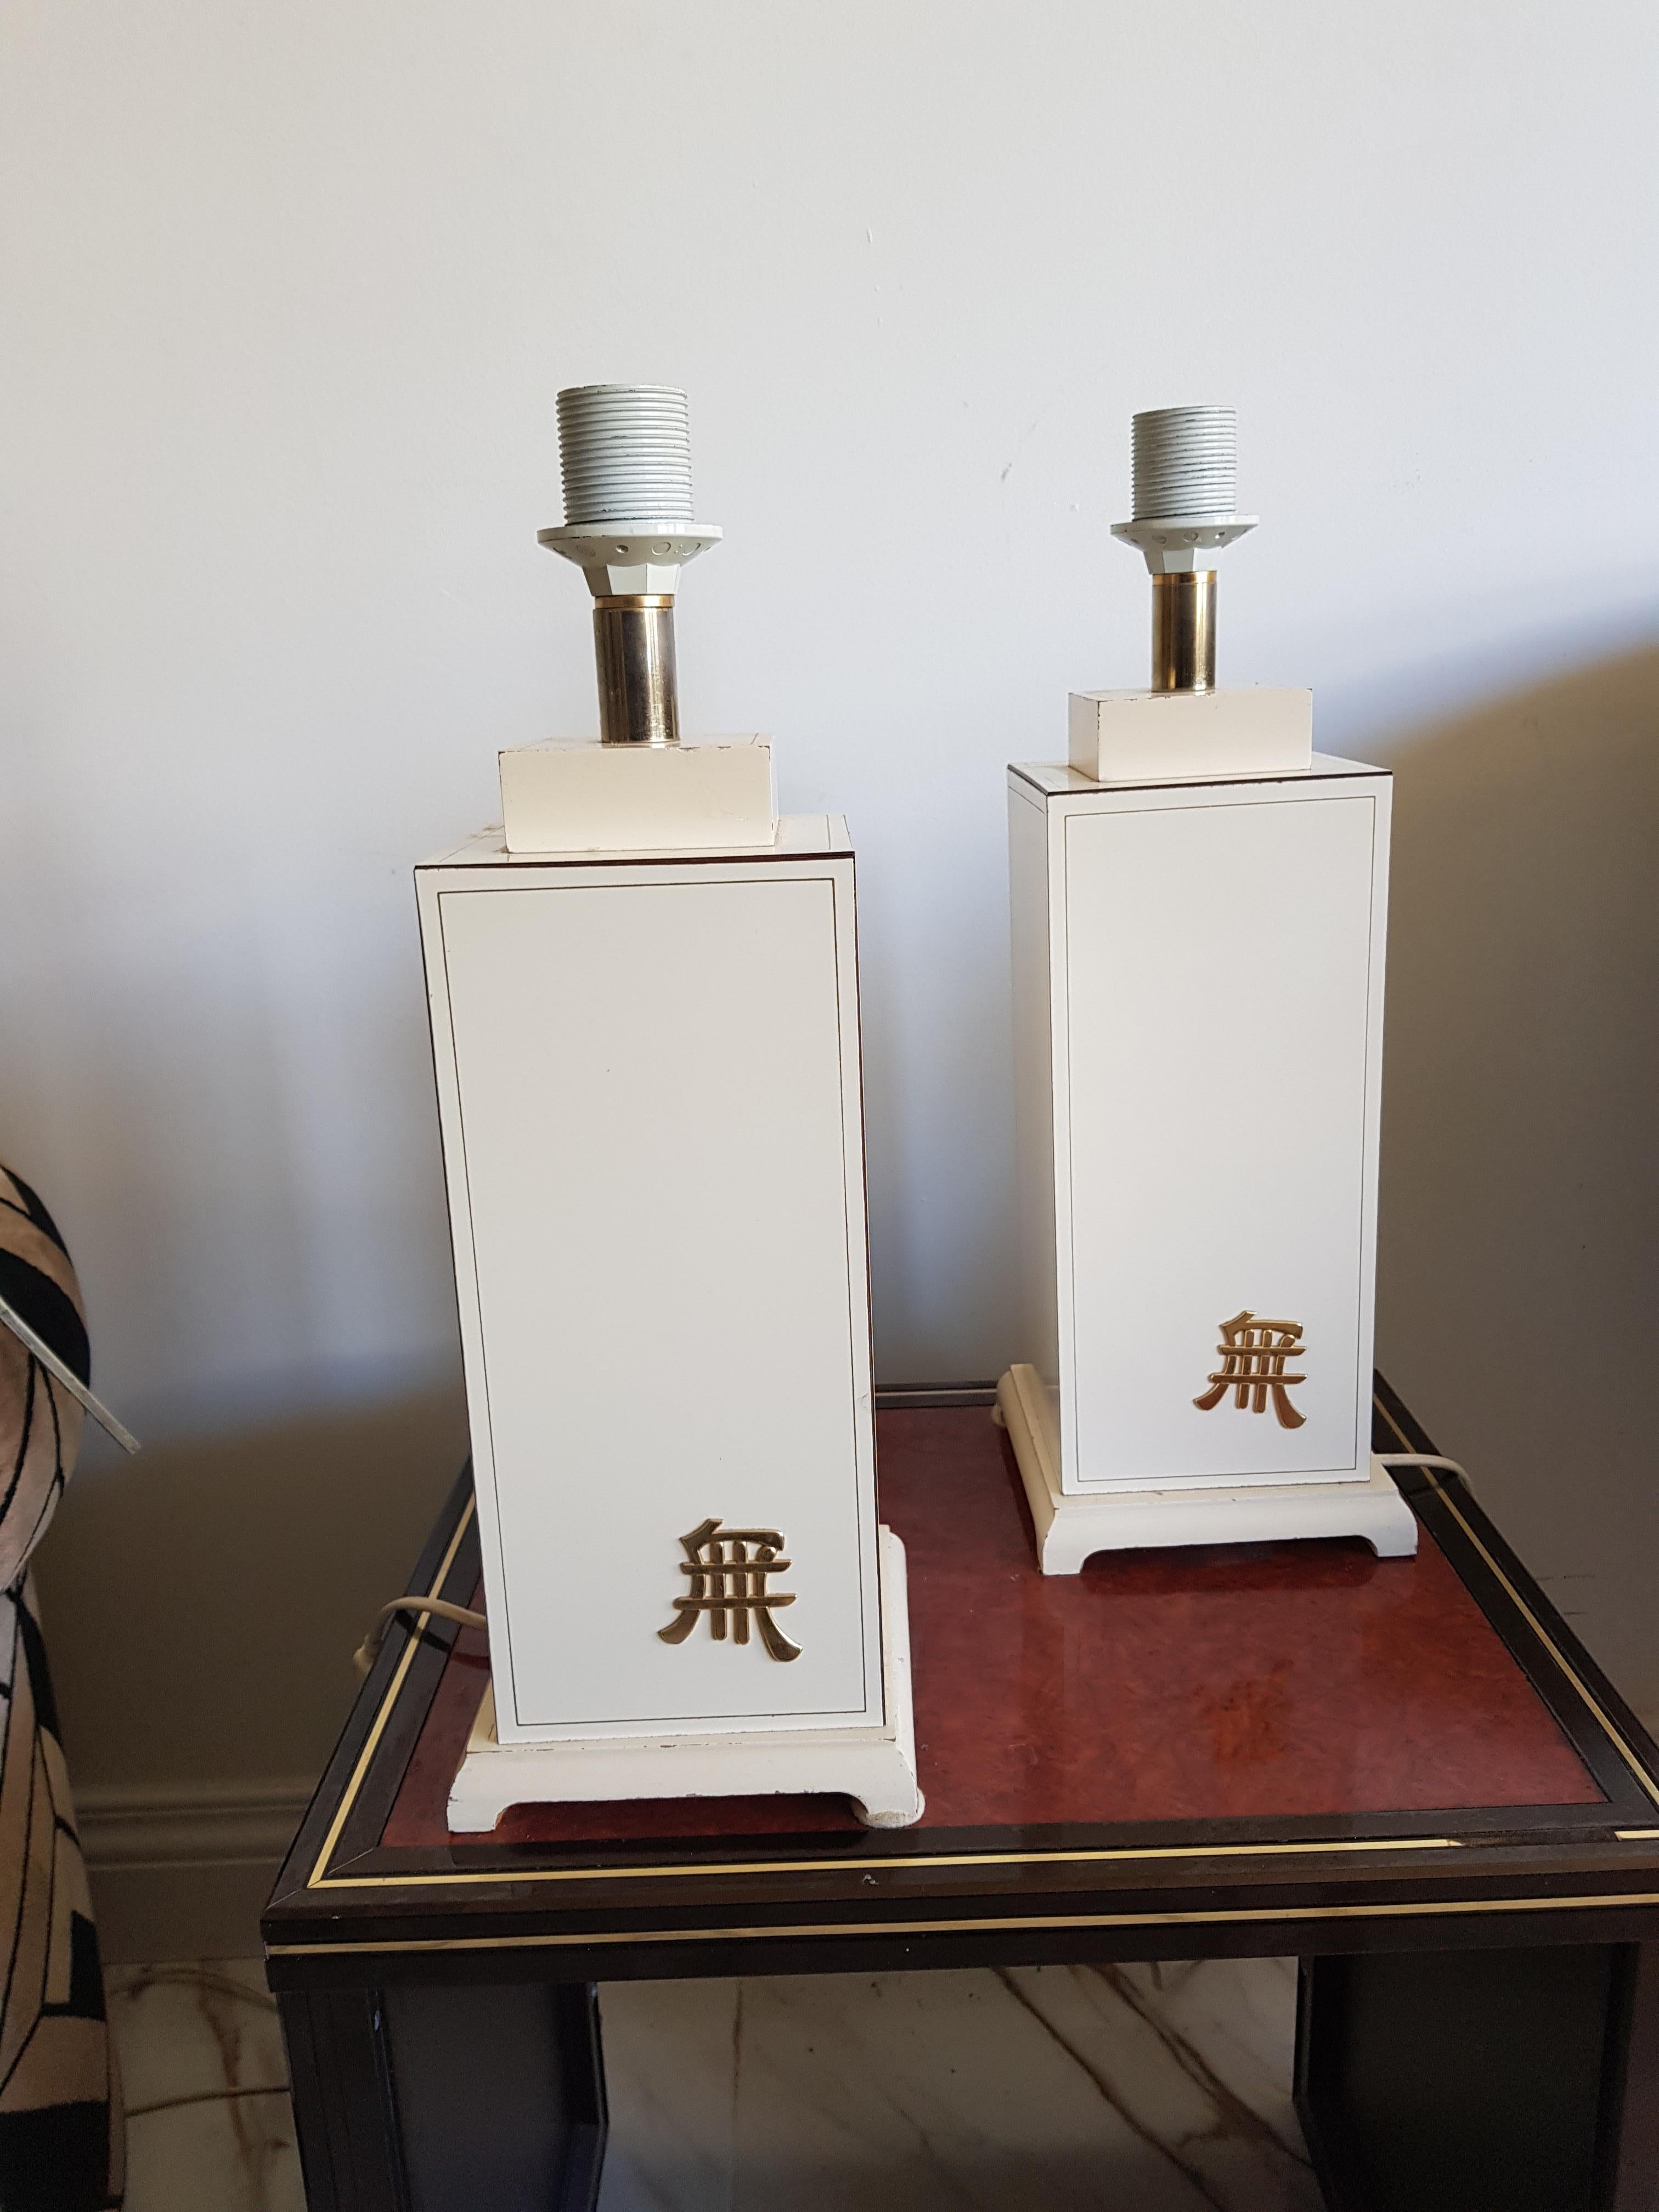 Vintage laquered wooden table lamp with gold lining and brass finish. A Japanese kanji sign on it, I looked it up on Google but so far without results. It’s probably something like brave, or luck anyway its positive!
Comes with free bulbs and free